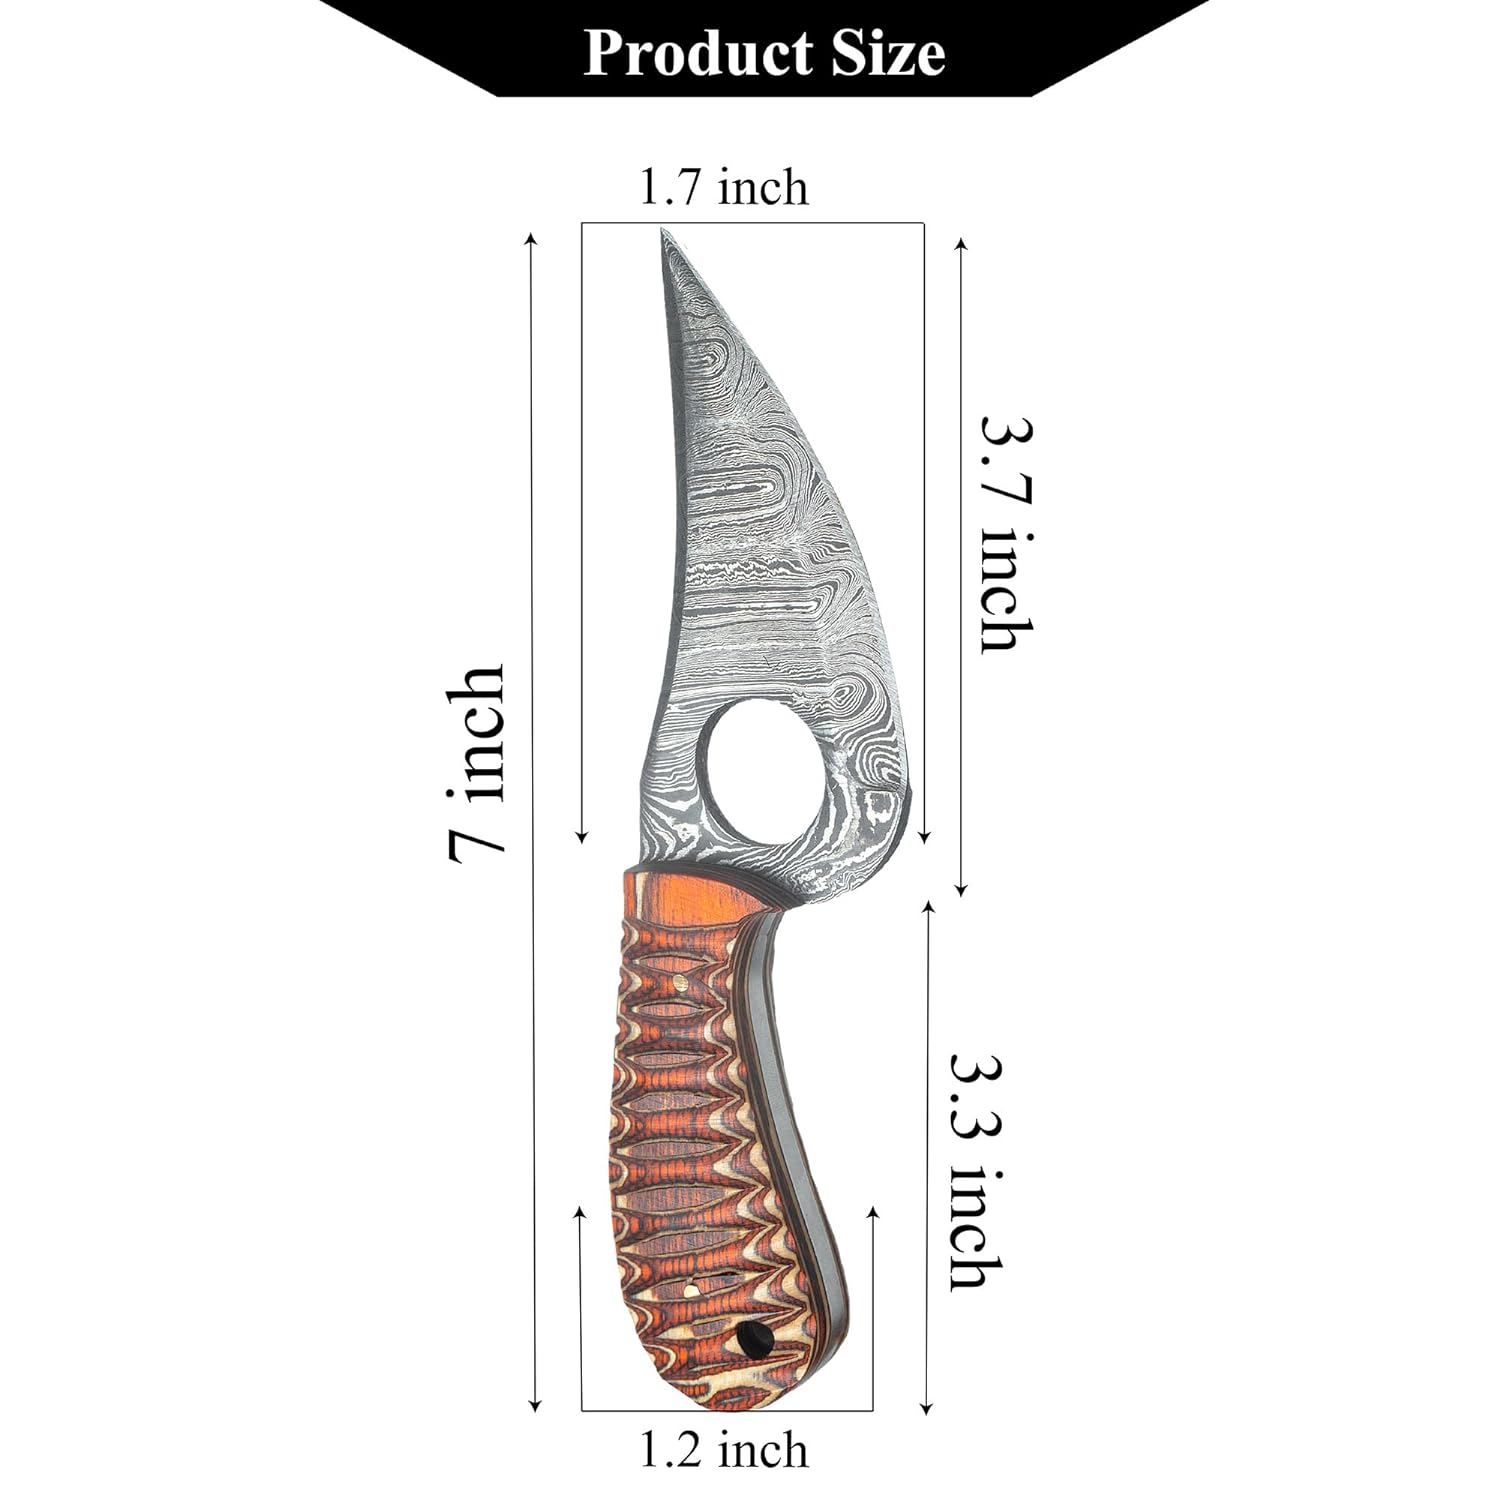 Handmade Damascus Predator Hunter Knife with Custom Leather Sheath - For Skinning, Camping, Outdoor - EDC 7” Fixed Blade Bushcraft Knives | Red Black Exotic Wood Handle (H2)